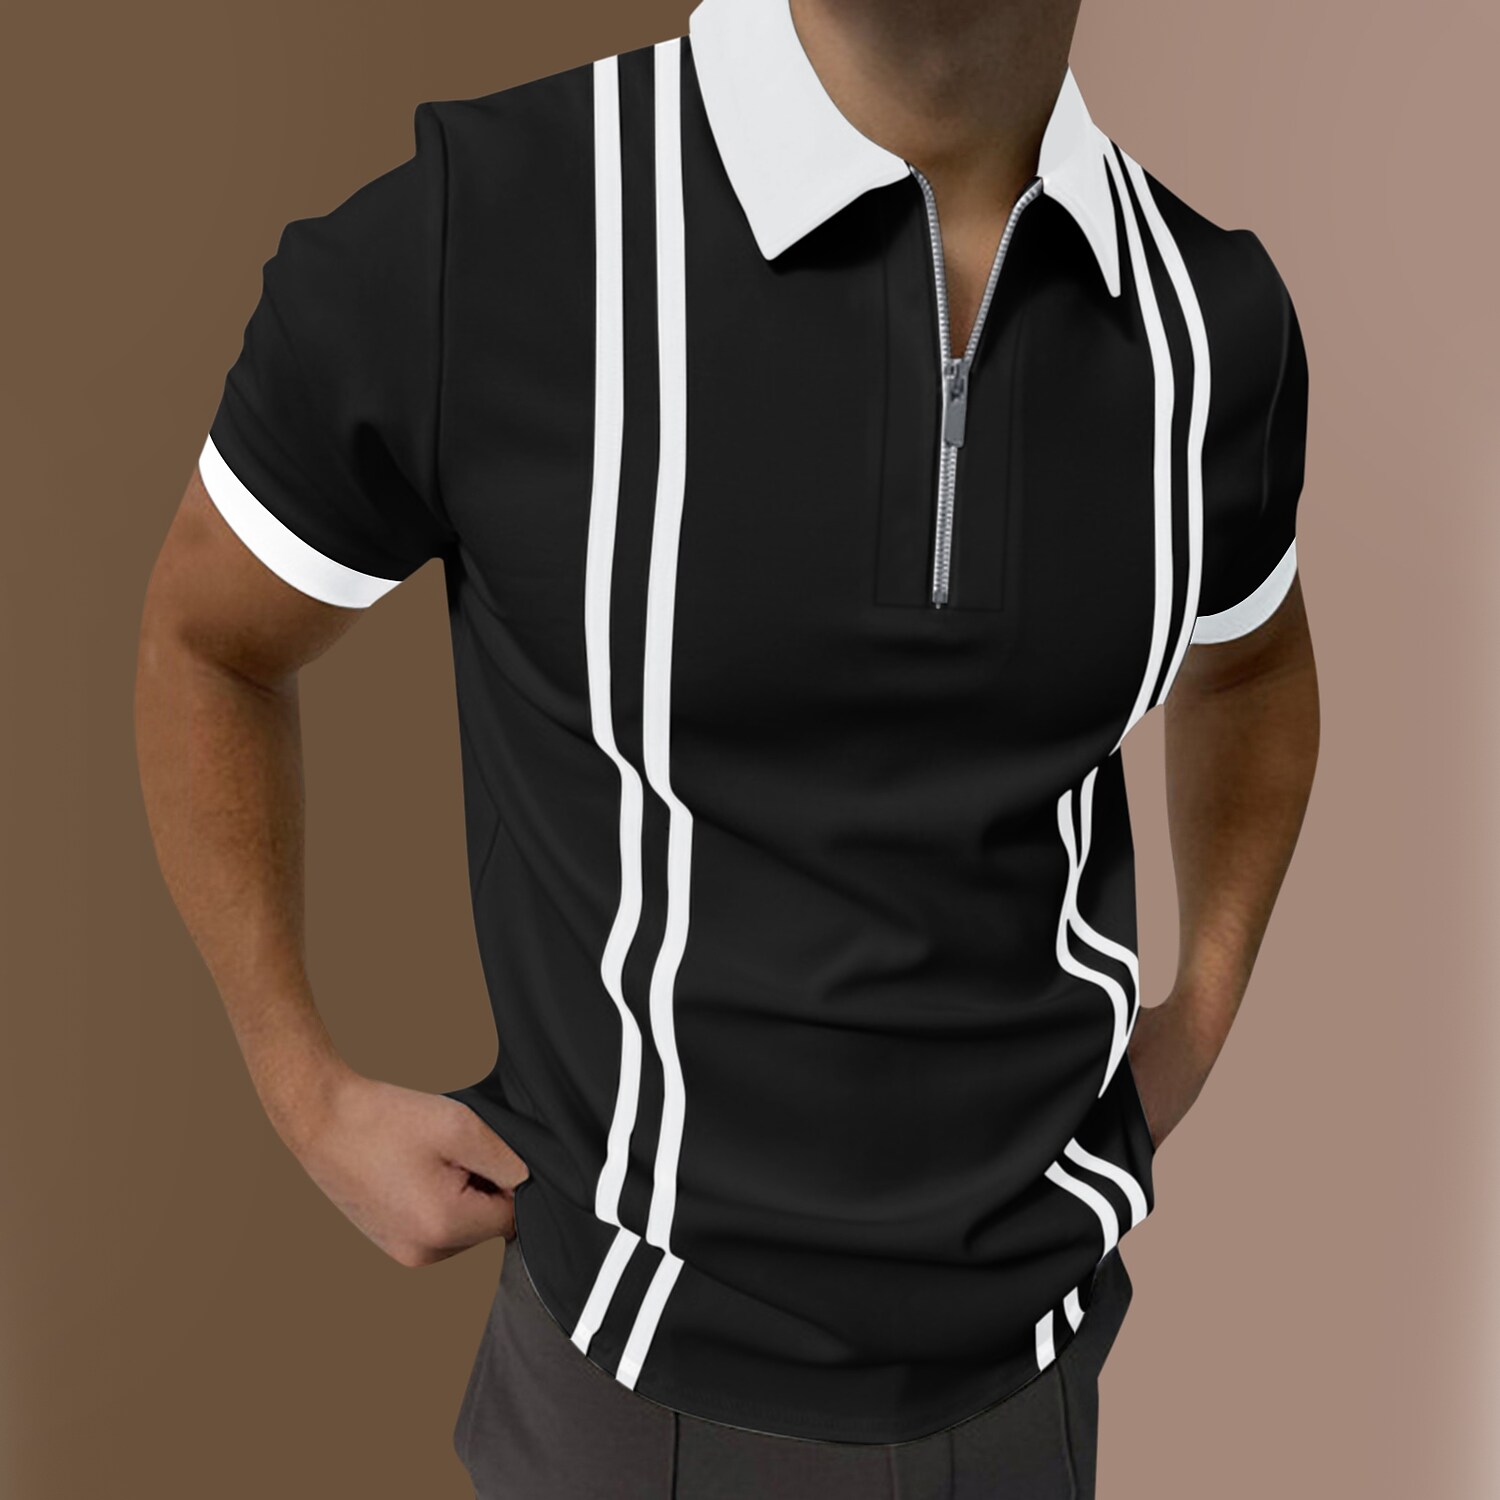 Men's Golf Shirt Striped Turndown Going out golf shirts Short Sleeve Tops Color Block Casual Sports Black Blue Gray